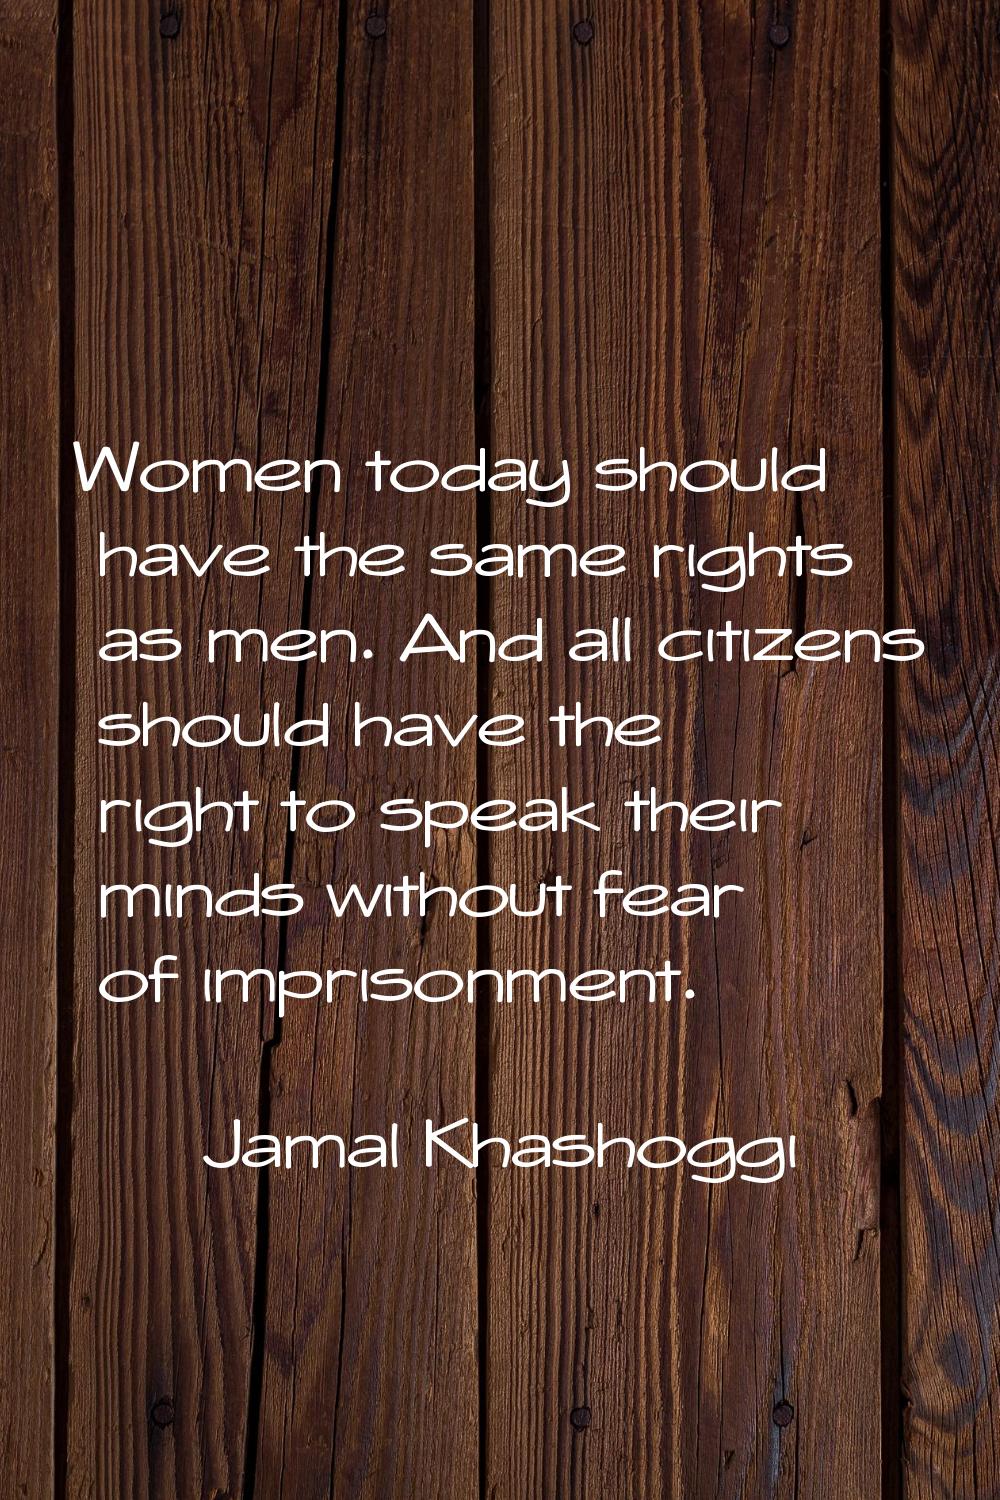 Women today should have the same rights as men. And all citizens should have the right to speak the